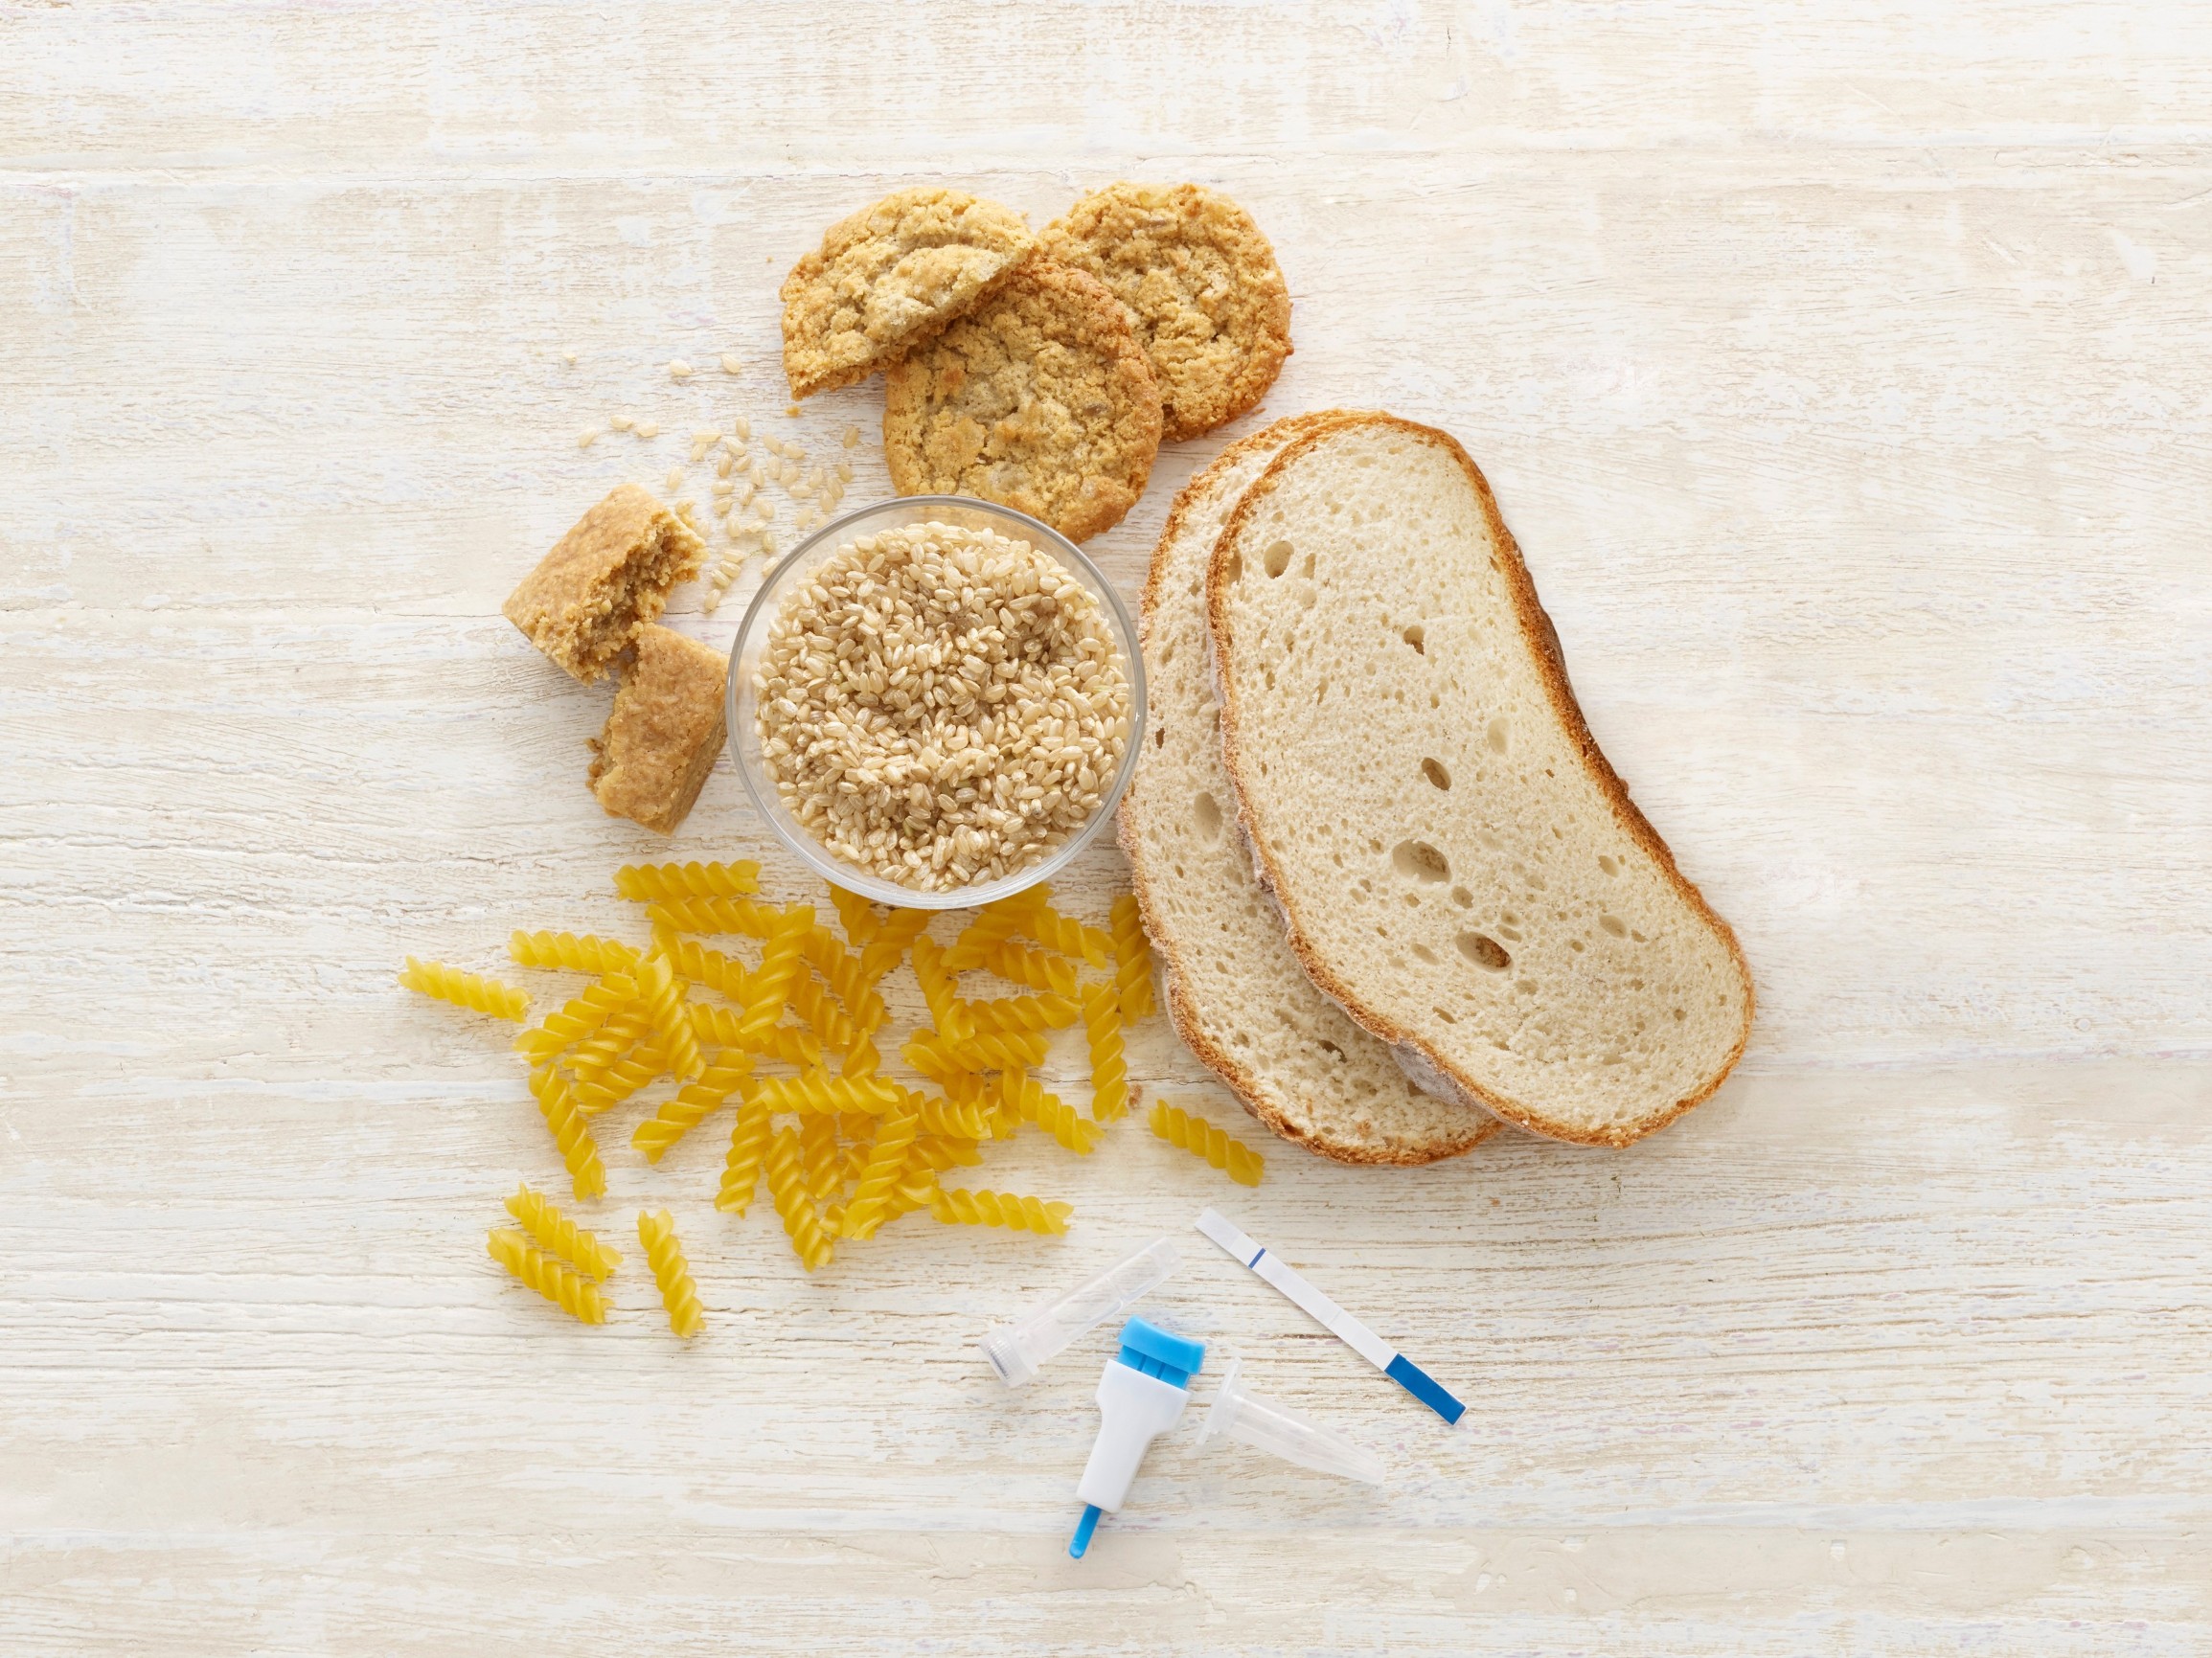 Bread and pasta with celiac test equipment, studio shot., Image: 385290453, License: Royalty-free, Restrictions: , Model Release: no, Credit line: SCIENCE PHOTO LIBRARY / Sciencephoto / Profimedia